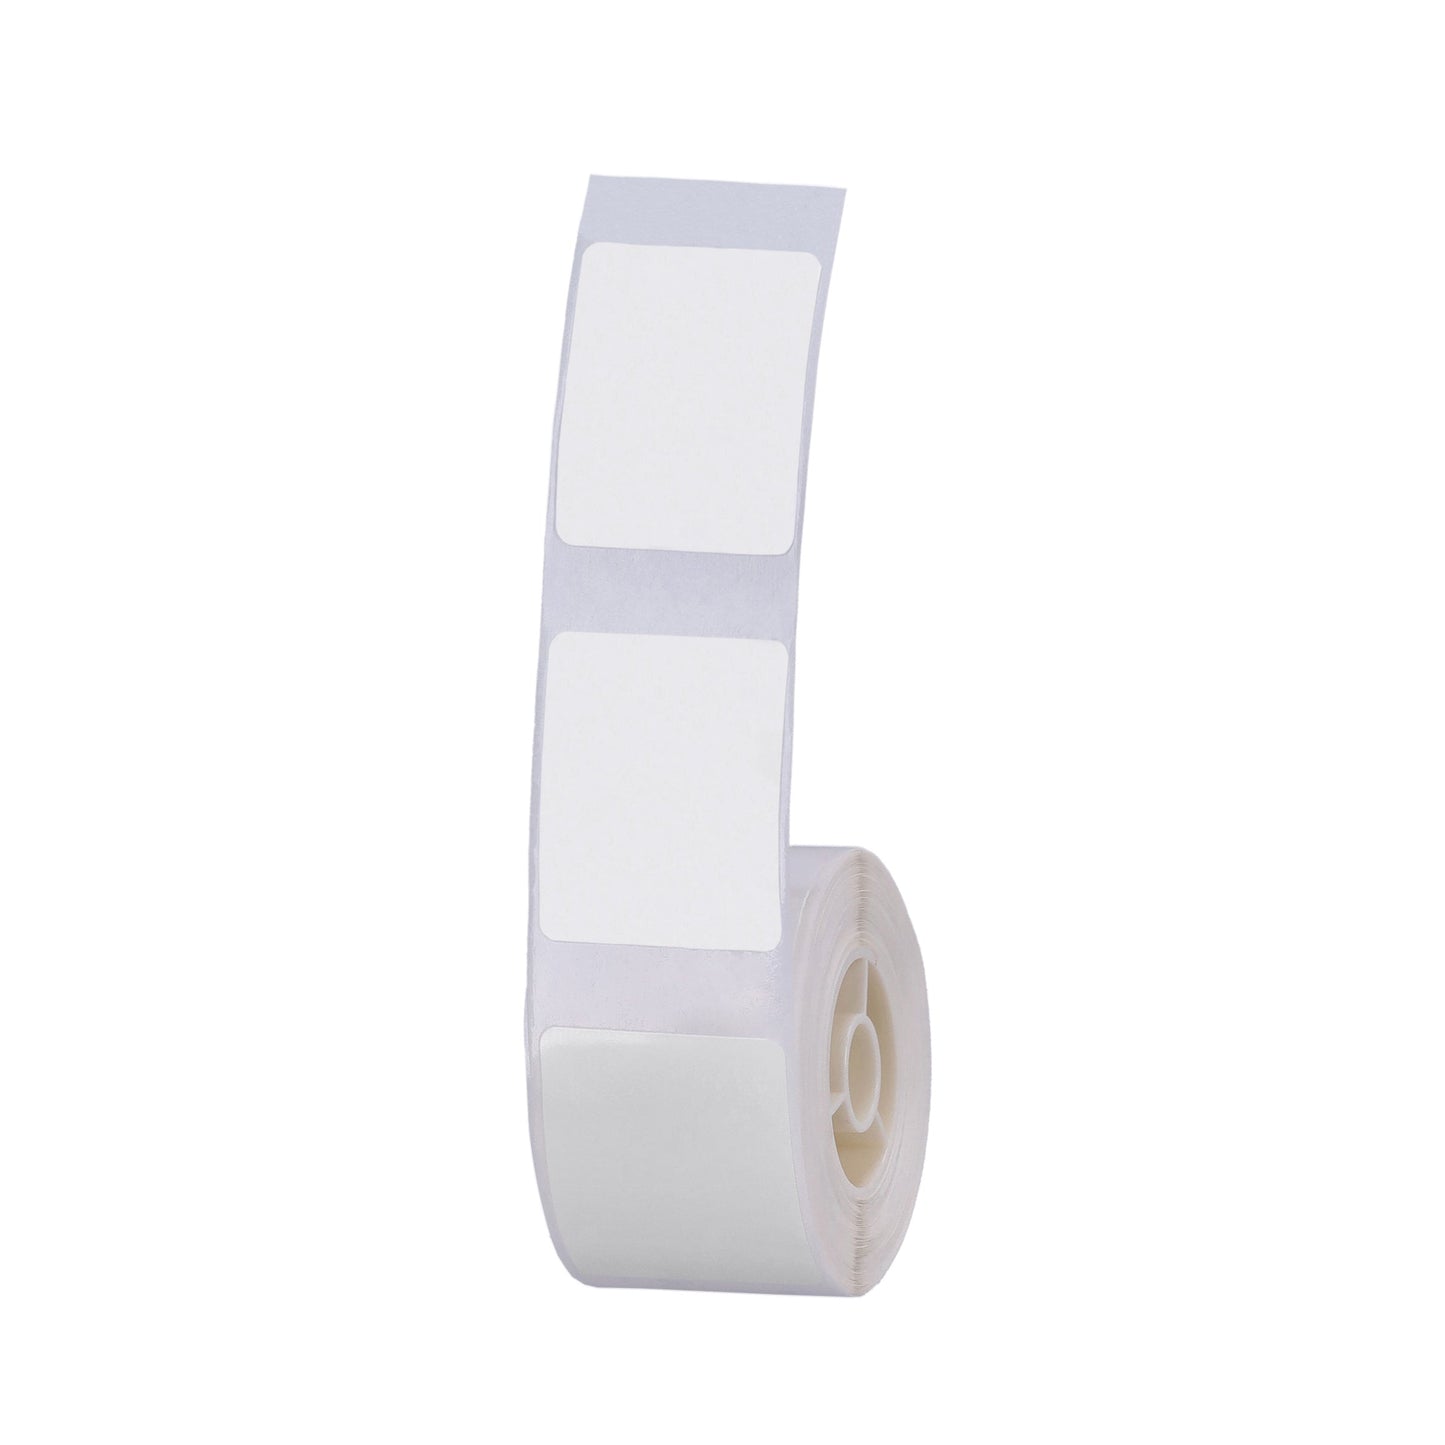 NIIMBOT - D101 ONLY - R25*30 - 210 LABELS PER ROLL - WHITE